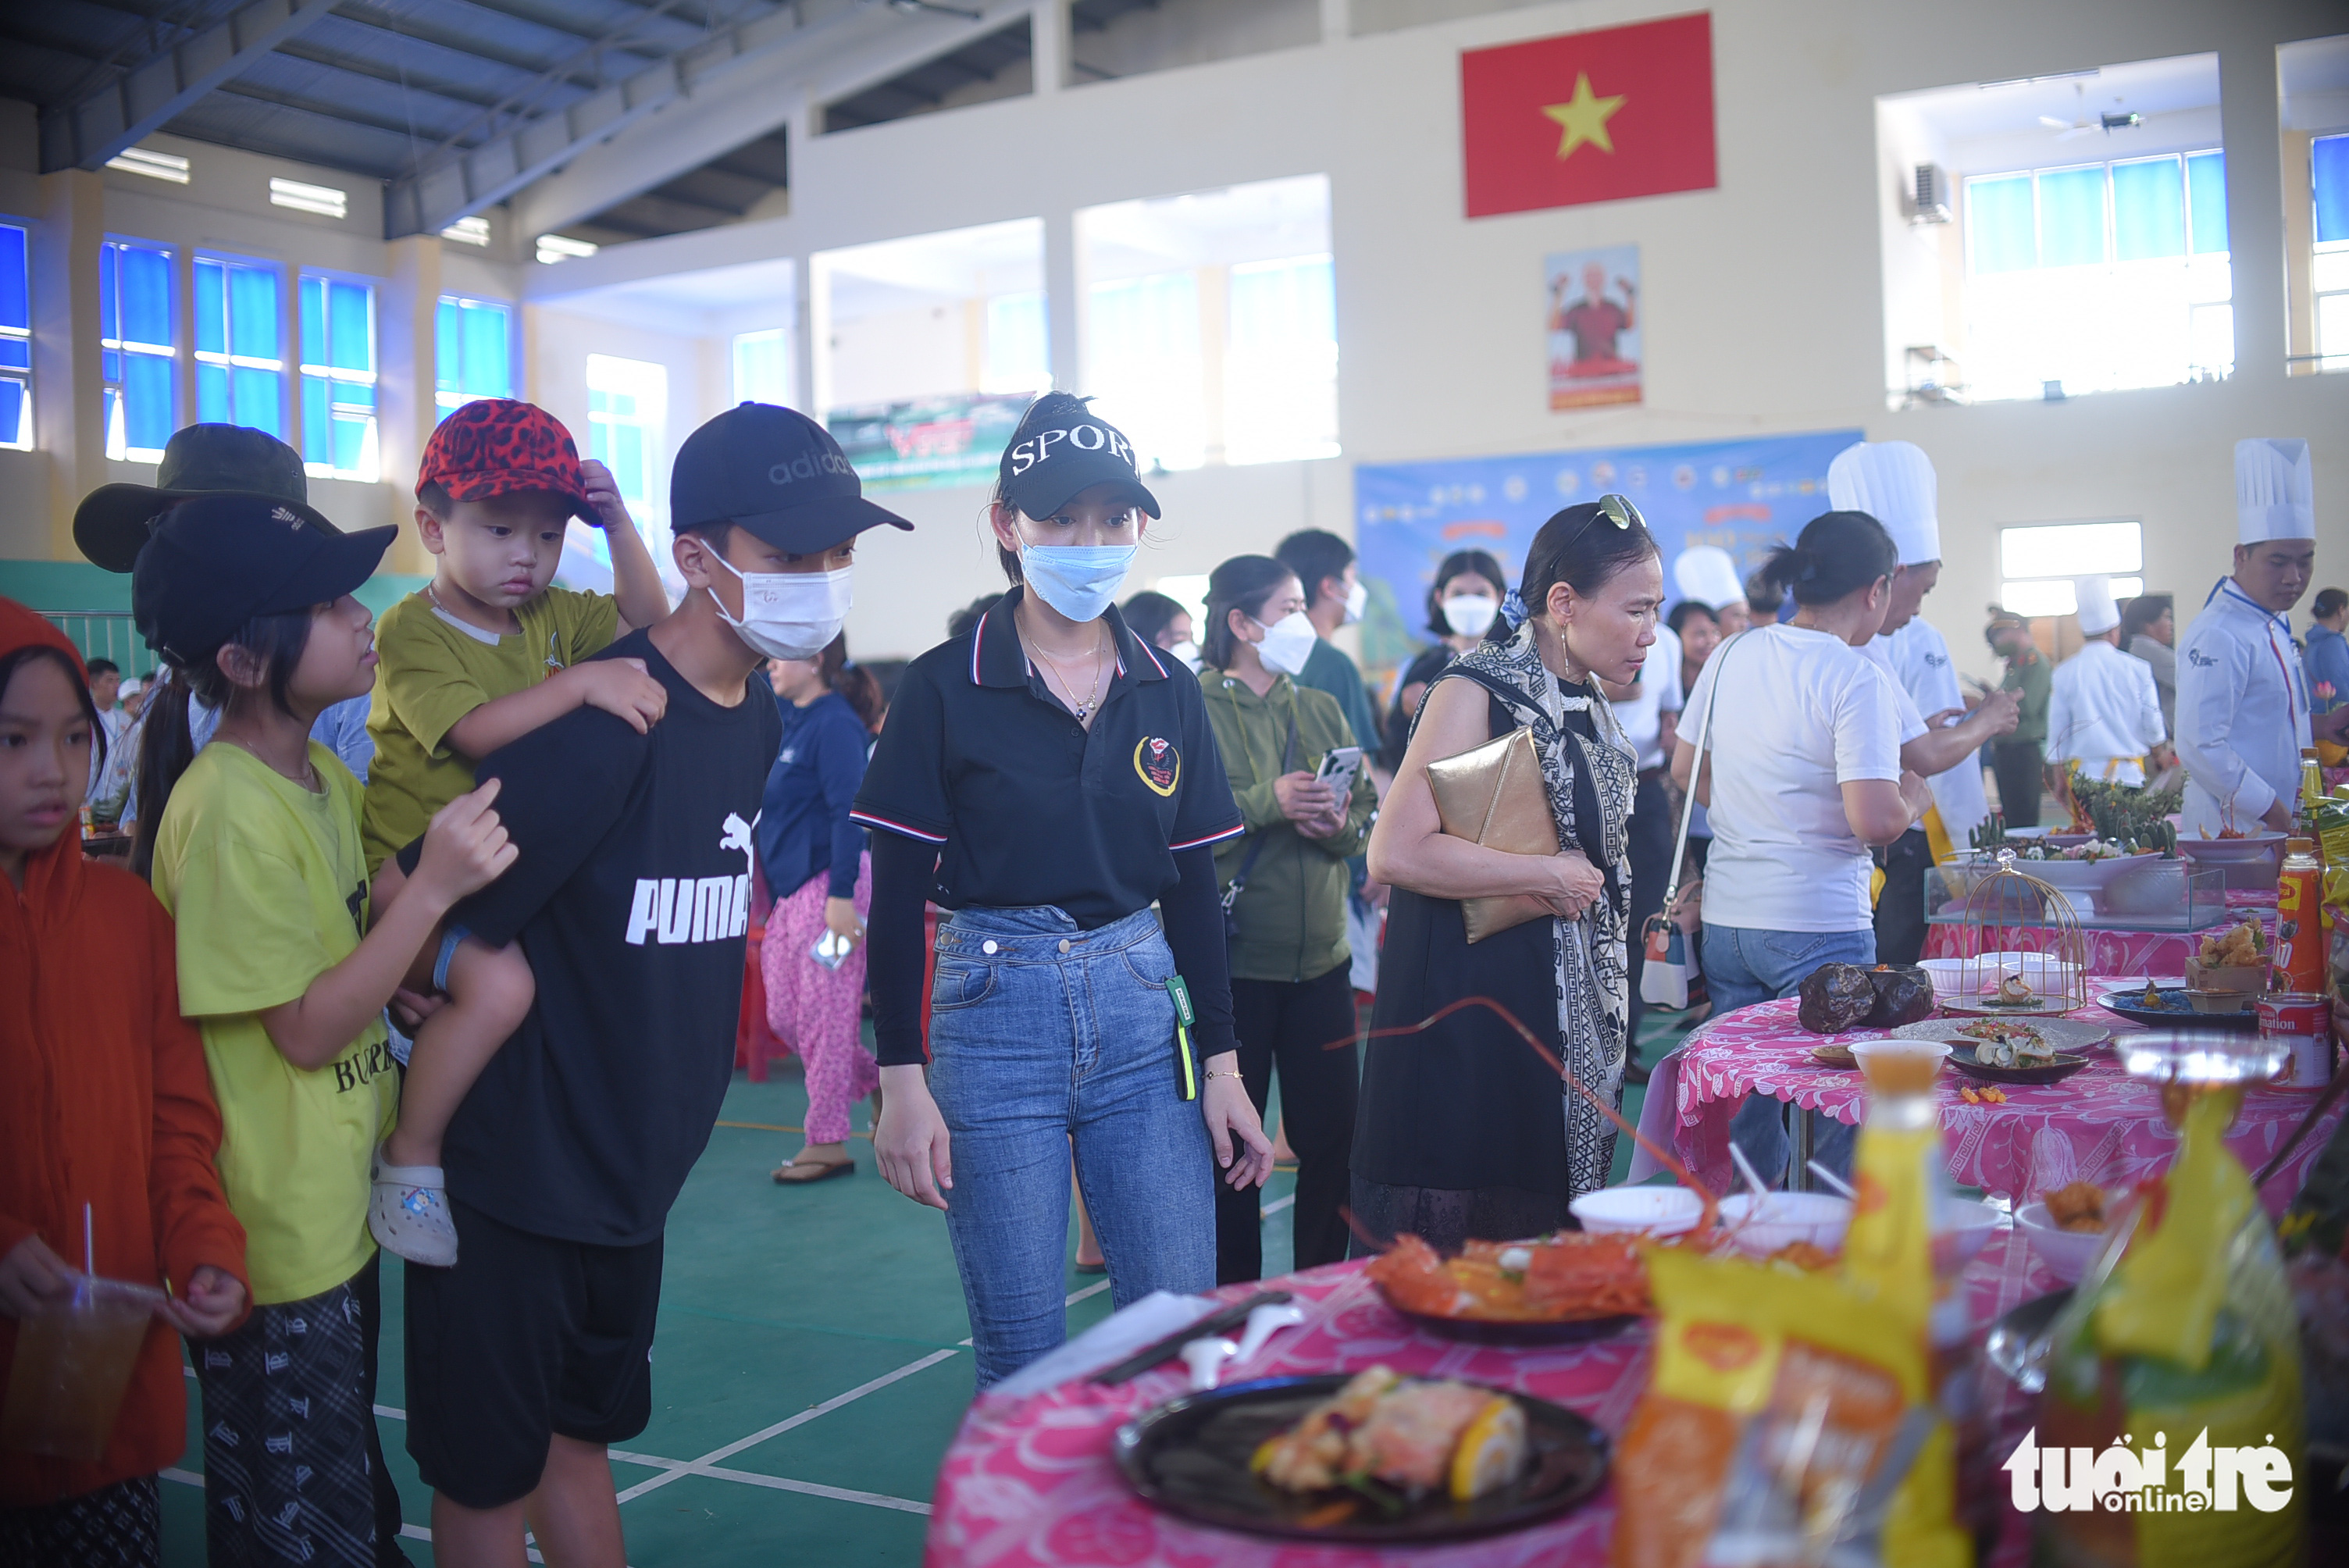 People visit a culinary contest, during which 75 chefs from 25 provinces and cities across Vietnam made 100 dishes from lobster in Phu Yen Province, July 31, 2022. Photo: Lam Thien / Tuoi Tre